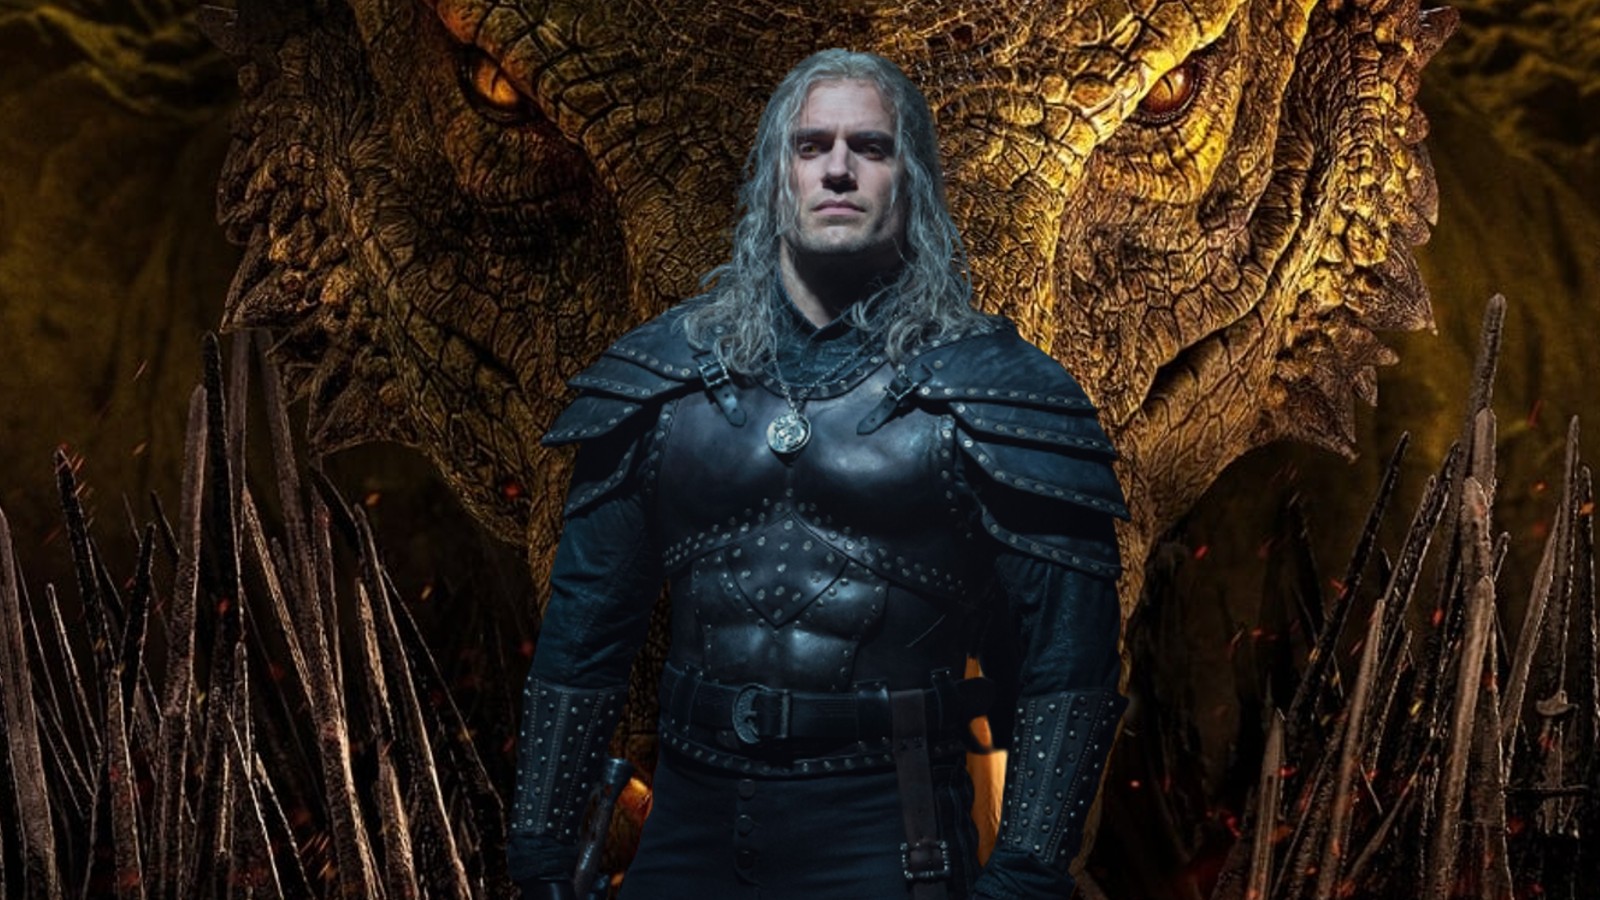 House of the Dragon fans want Henry Cavill to play most important Targaryen  - Dexerto